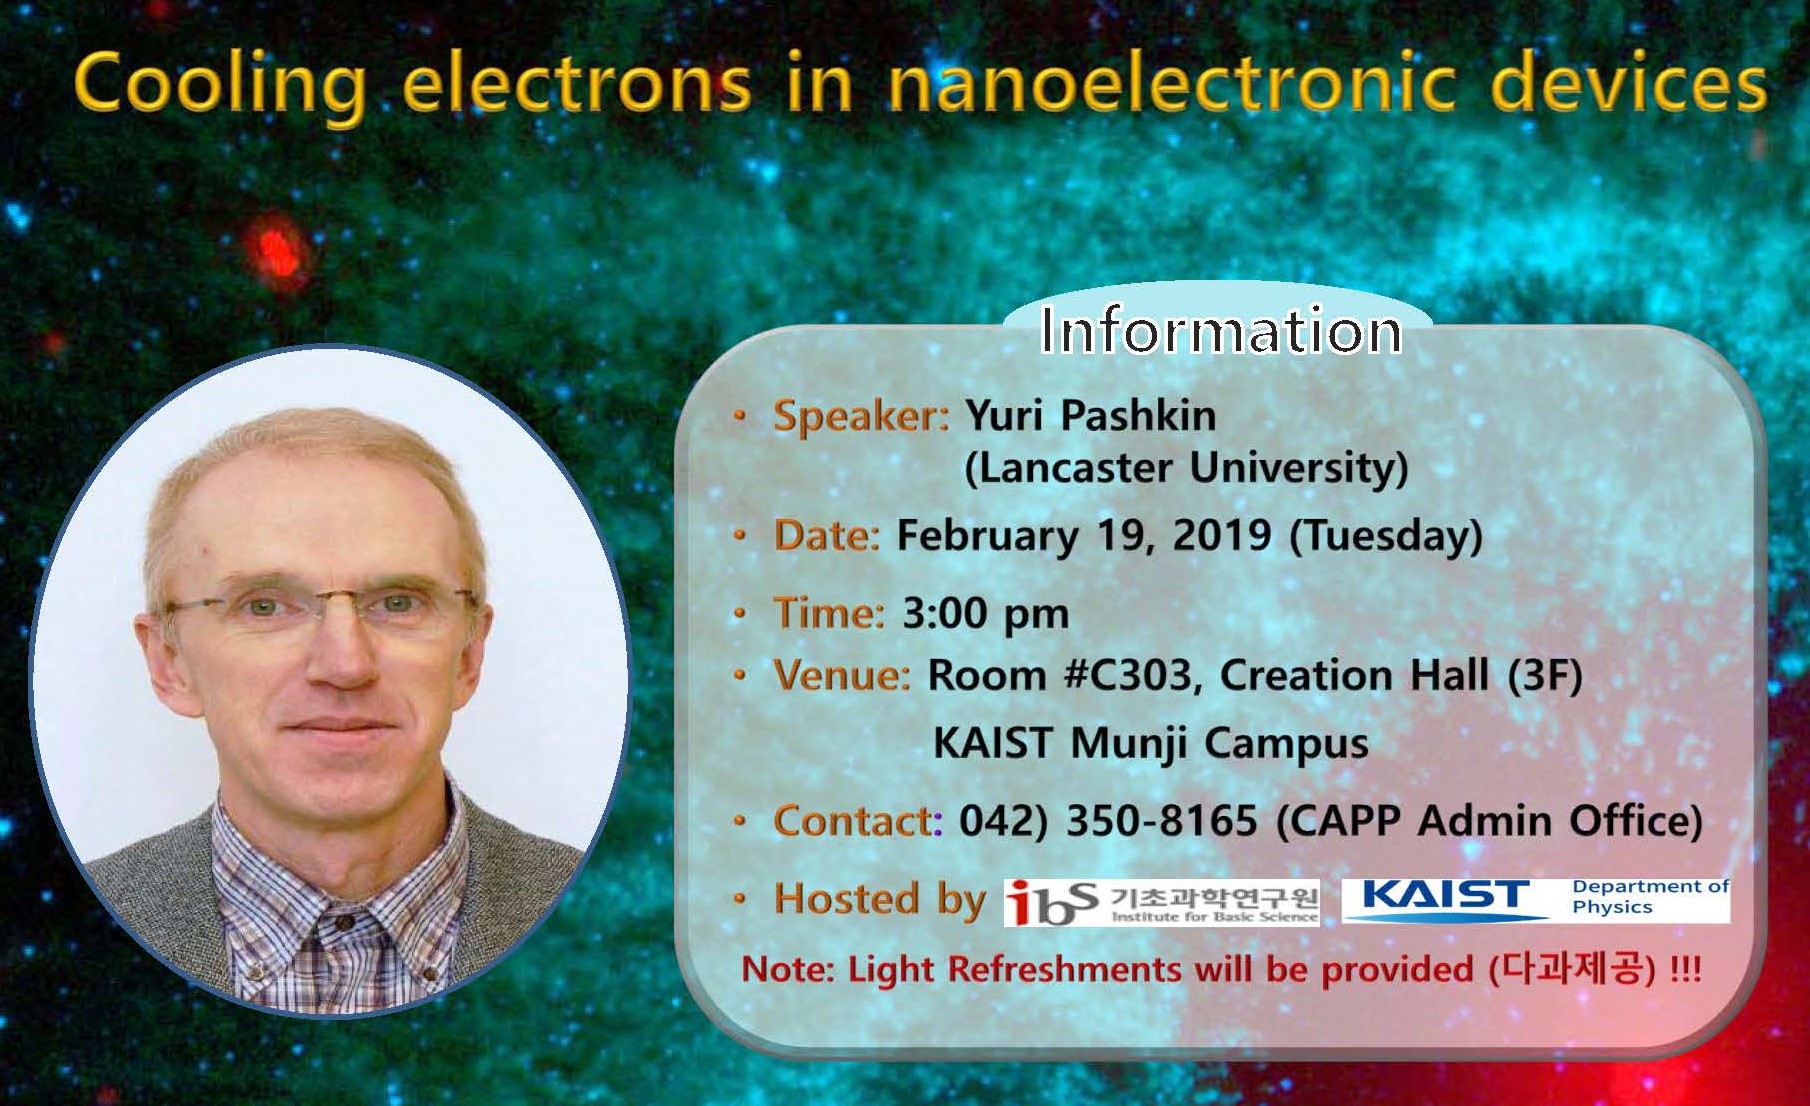 [CAPP 세미나] Cooling electrons in nanoelectronic devices 사진